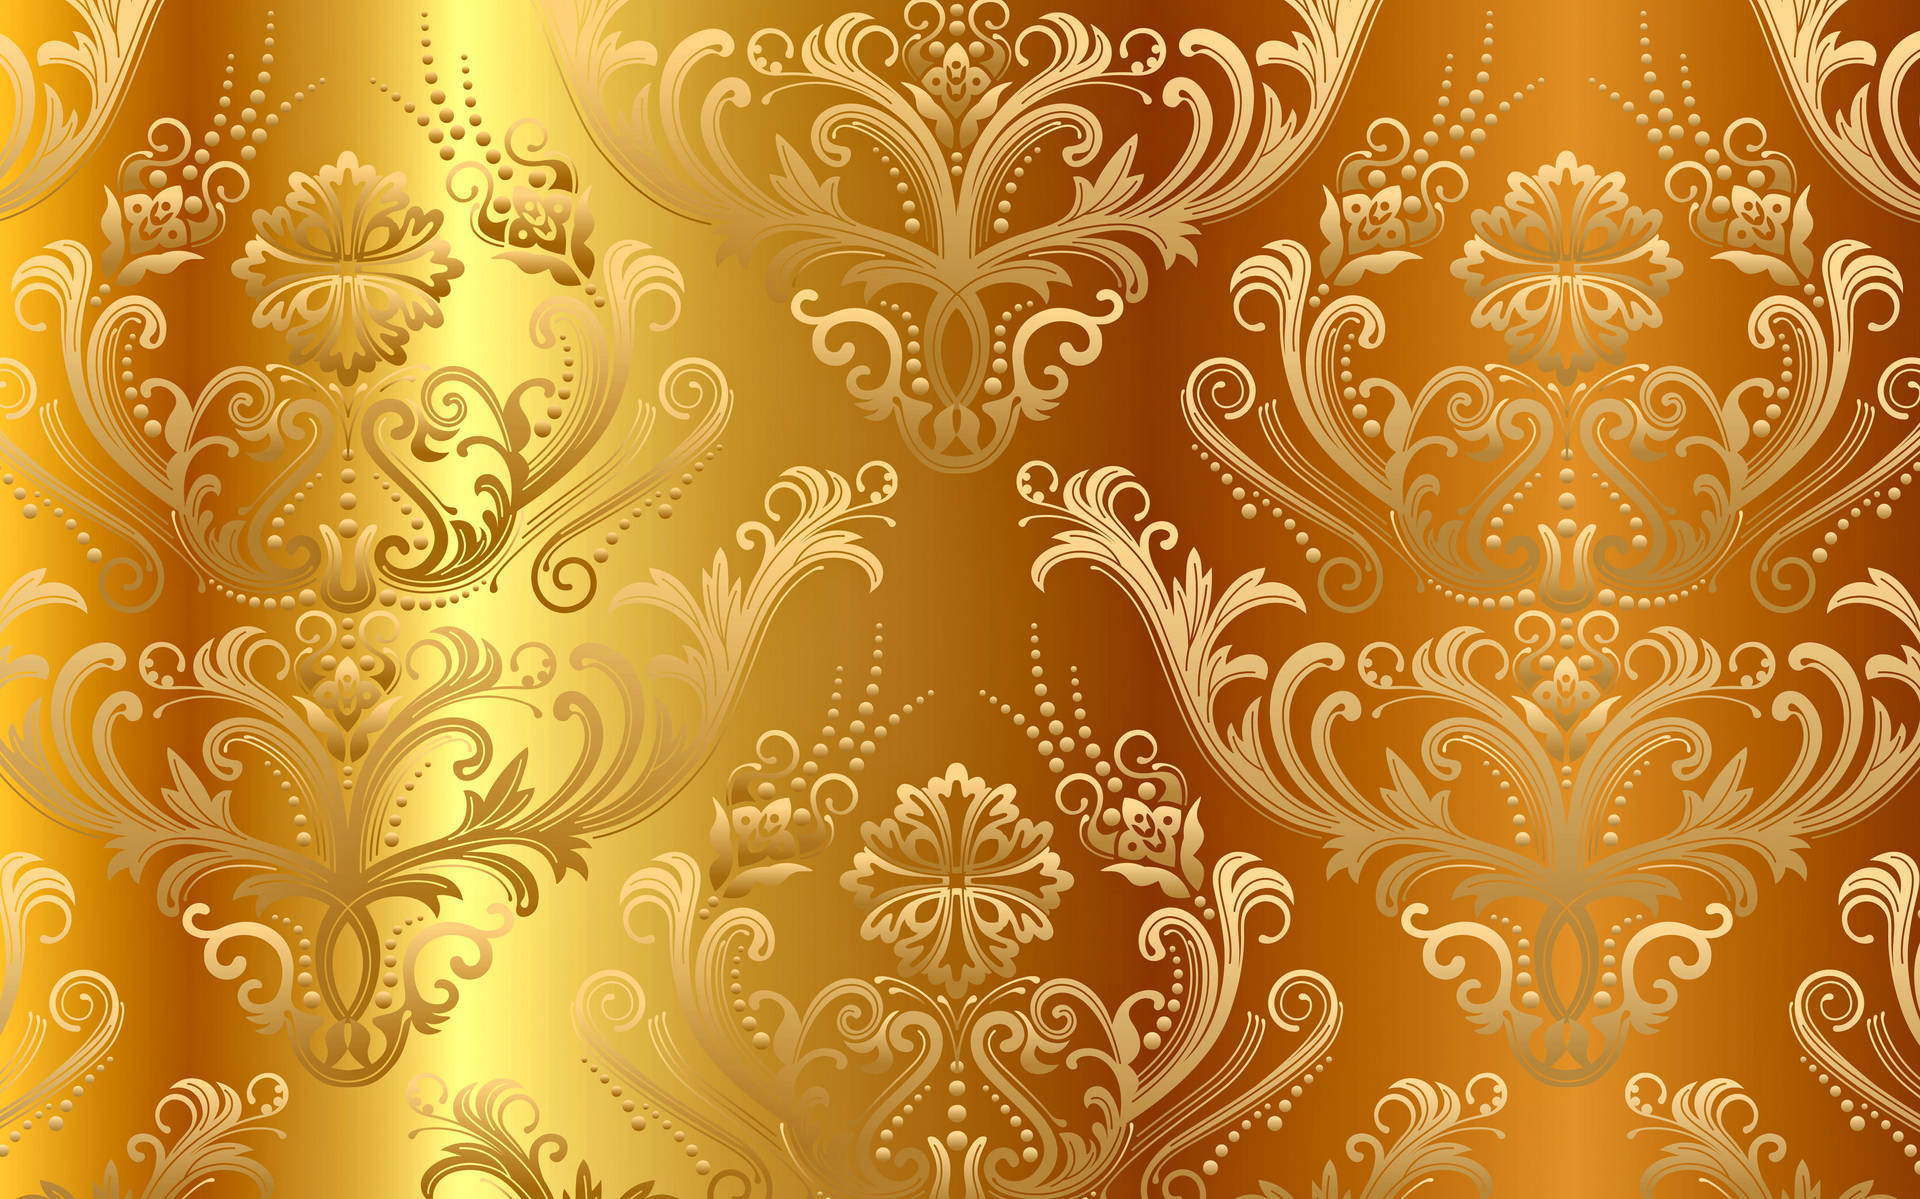 Classic Golden Floral Patterns Background